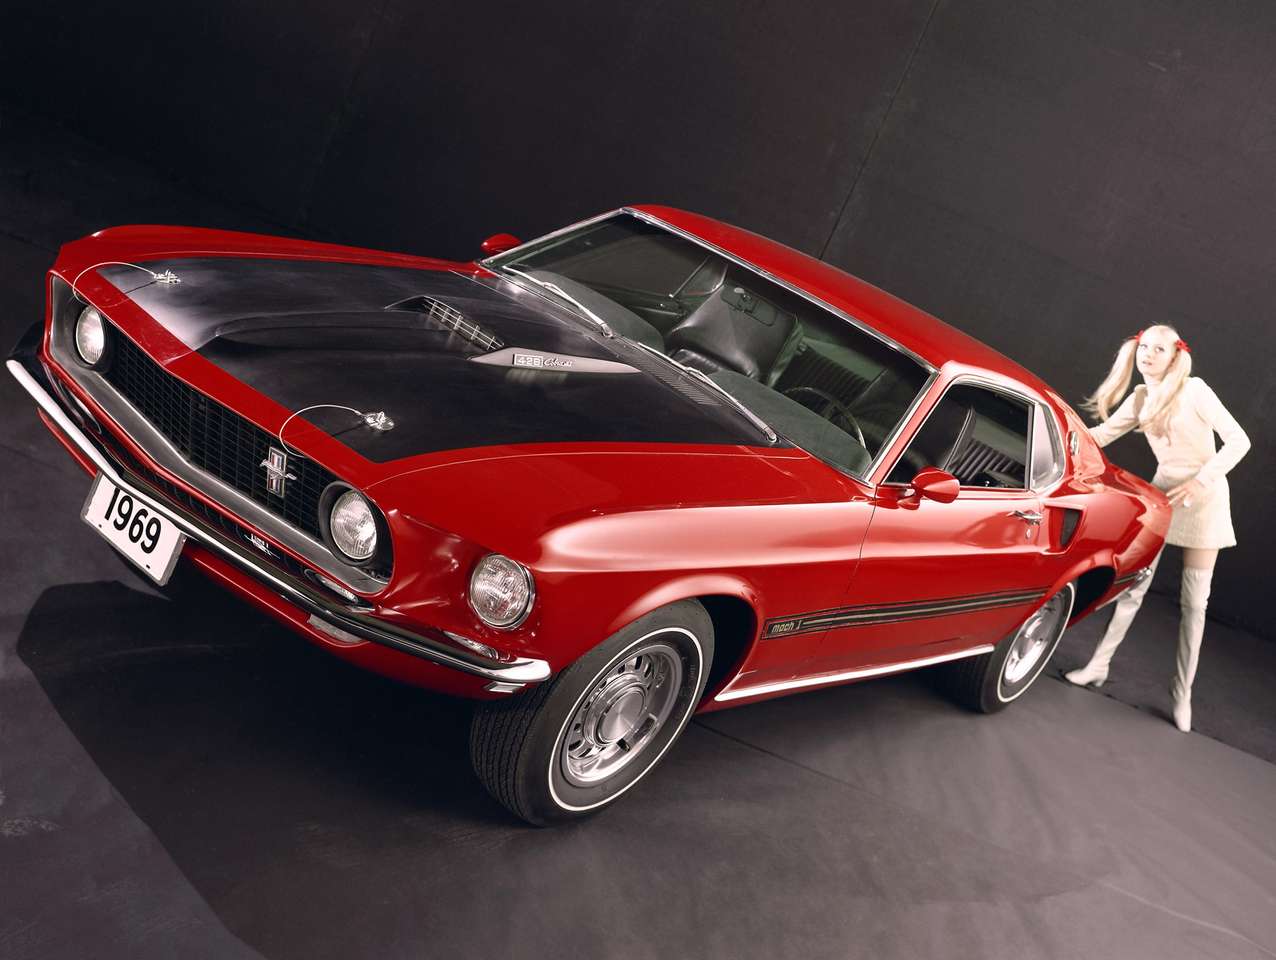 1969 Ford Mustang Mach 1 428 Super Cobra Jet online puzzle